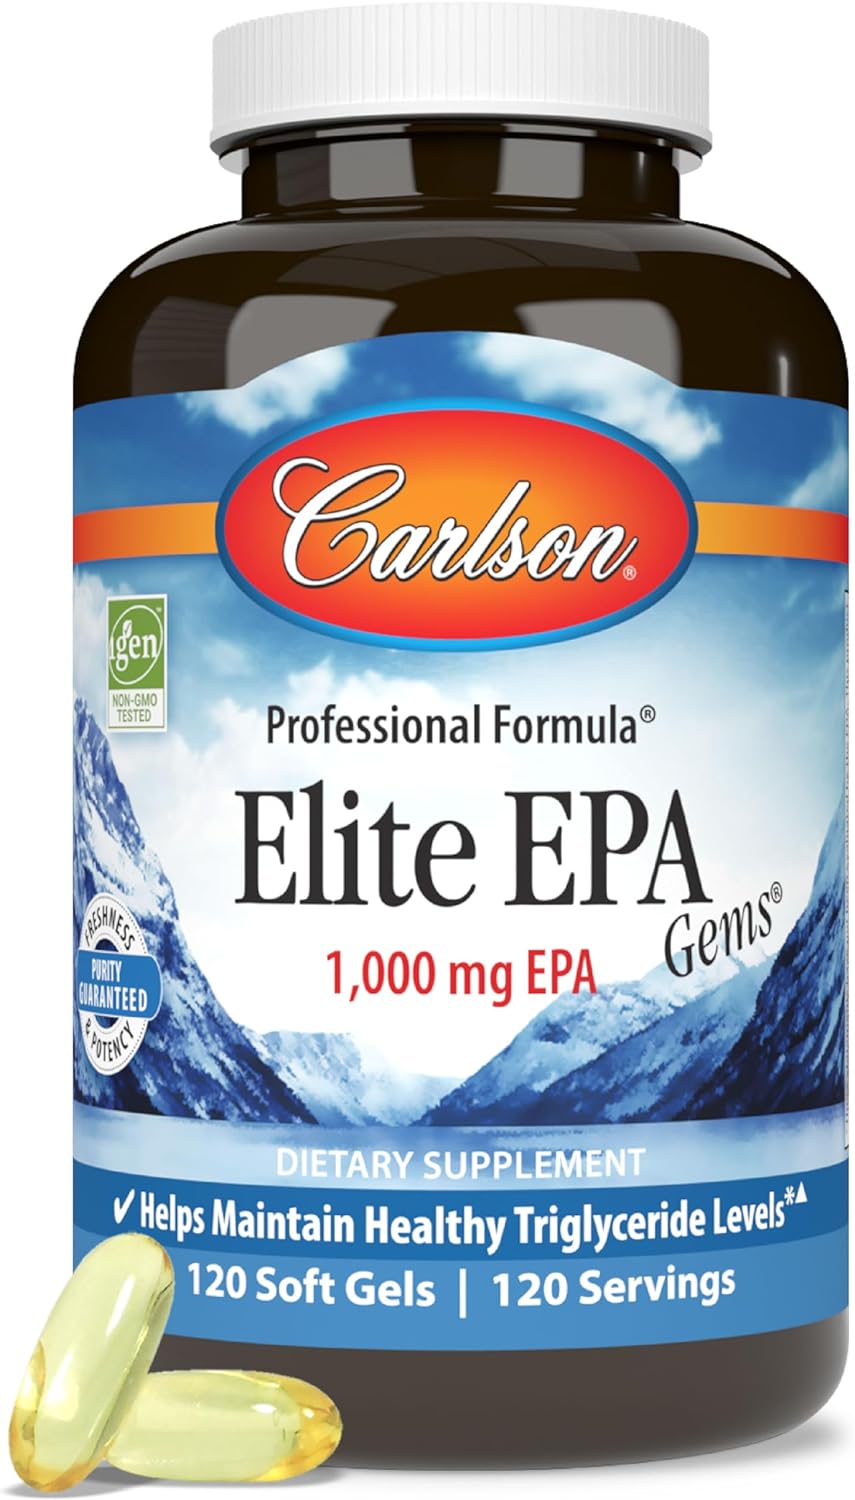 Carlson - Elite EPA Gems, 1000 mg EPA Fish Oil, Wild-Caught, Norwegian Fish Oil, Sustainably Sourced, Helps Maintain Healthy Triglyceride Levels, 120 Softgels